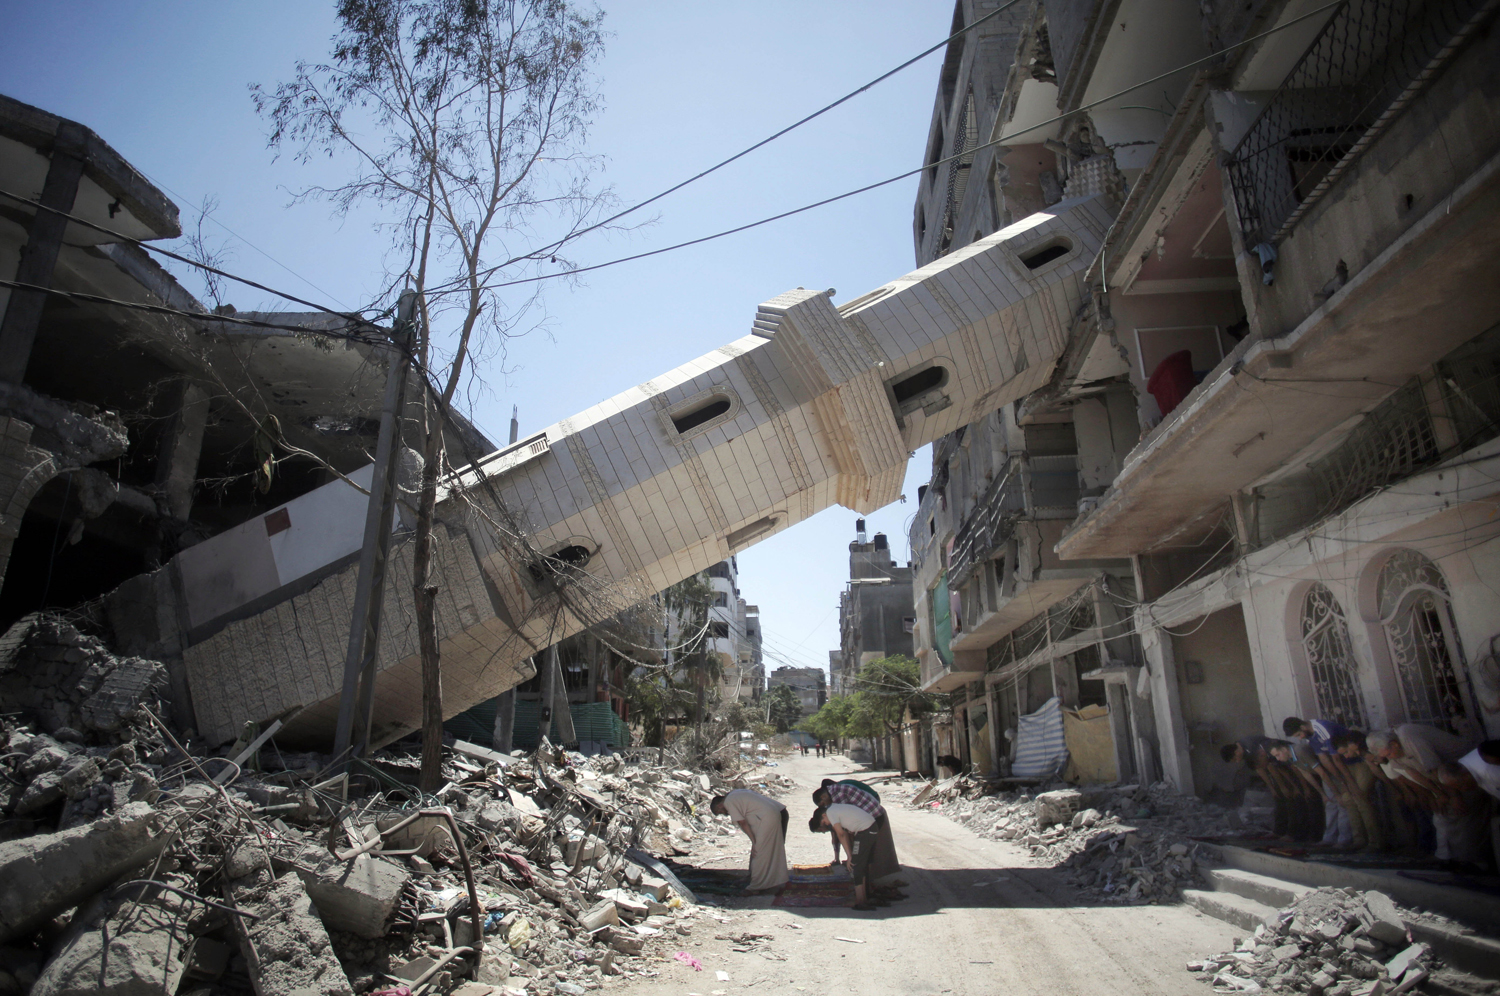 Aug. 8, 2014. Palestinians attend Friday noon prayers in the shadow of a toppled minaret at a mosque in Gaza City.